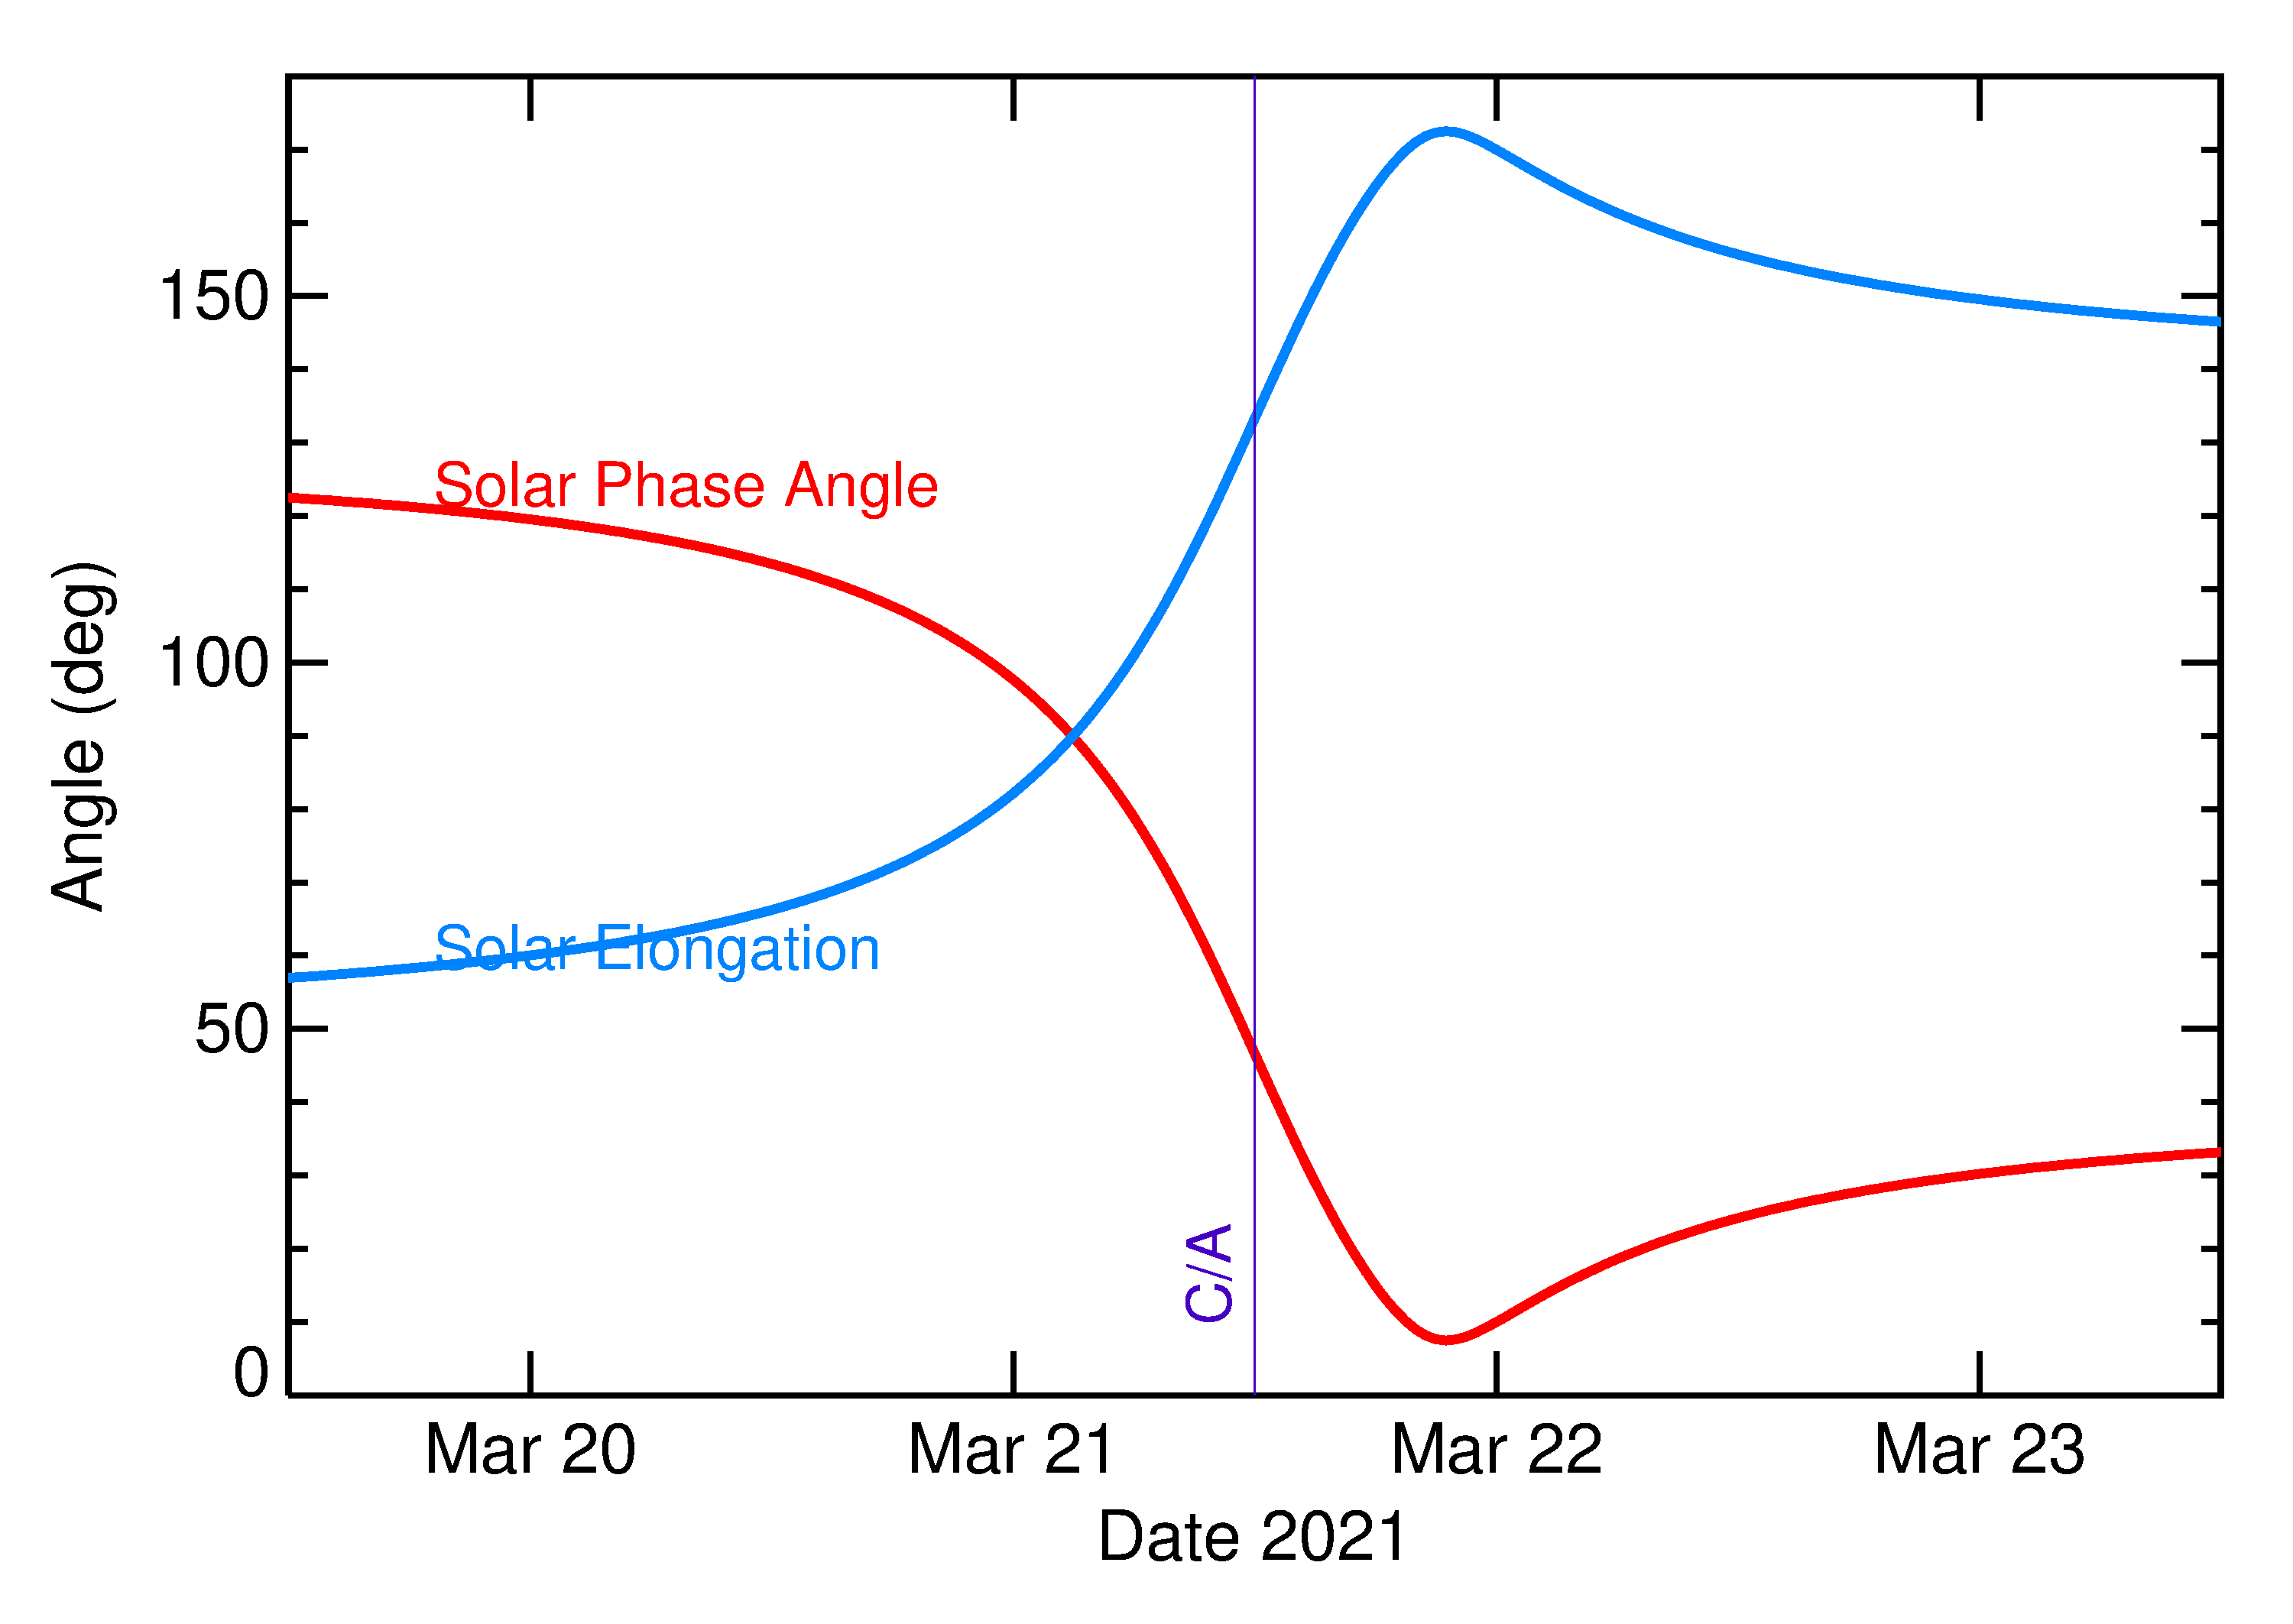 Solar Elongation and Solar Phase Angle of 2021 FF2 in the days around closest approach